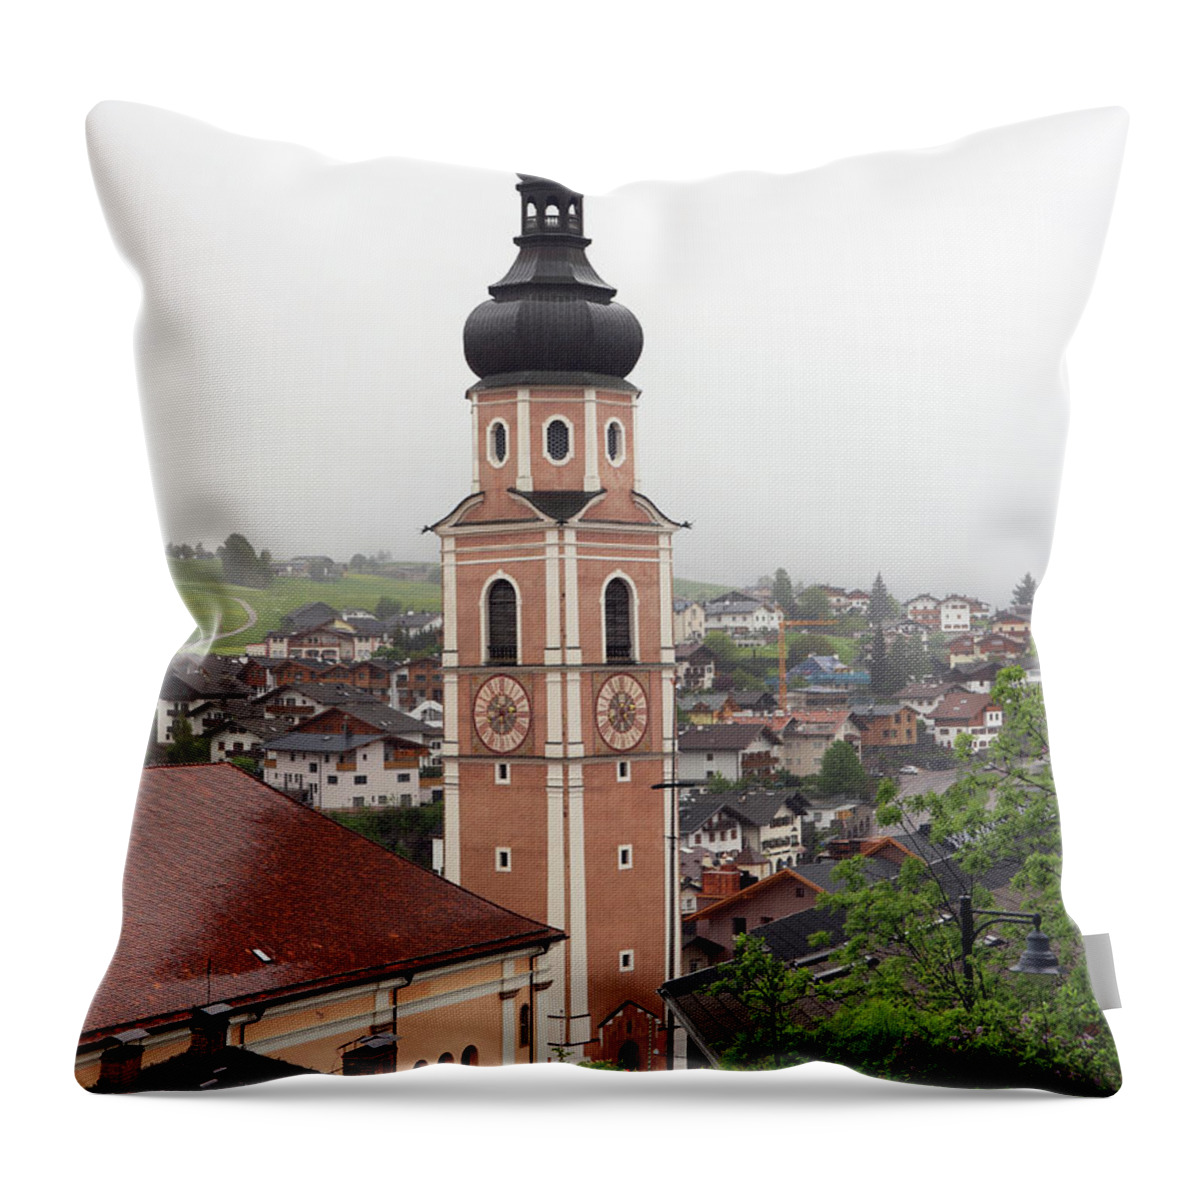 Castelrotto Throw Pillow featuring the photograph Castelrotto Italy 8857 by Jack Schultz